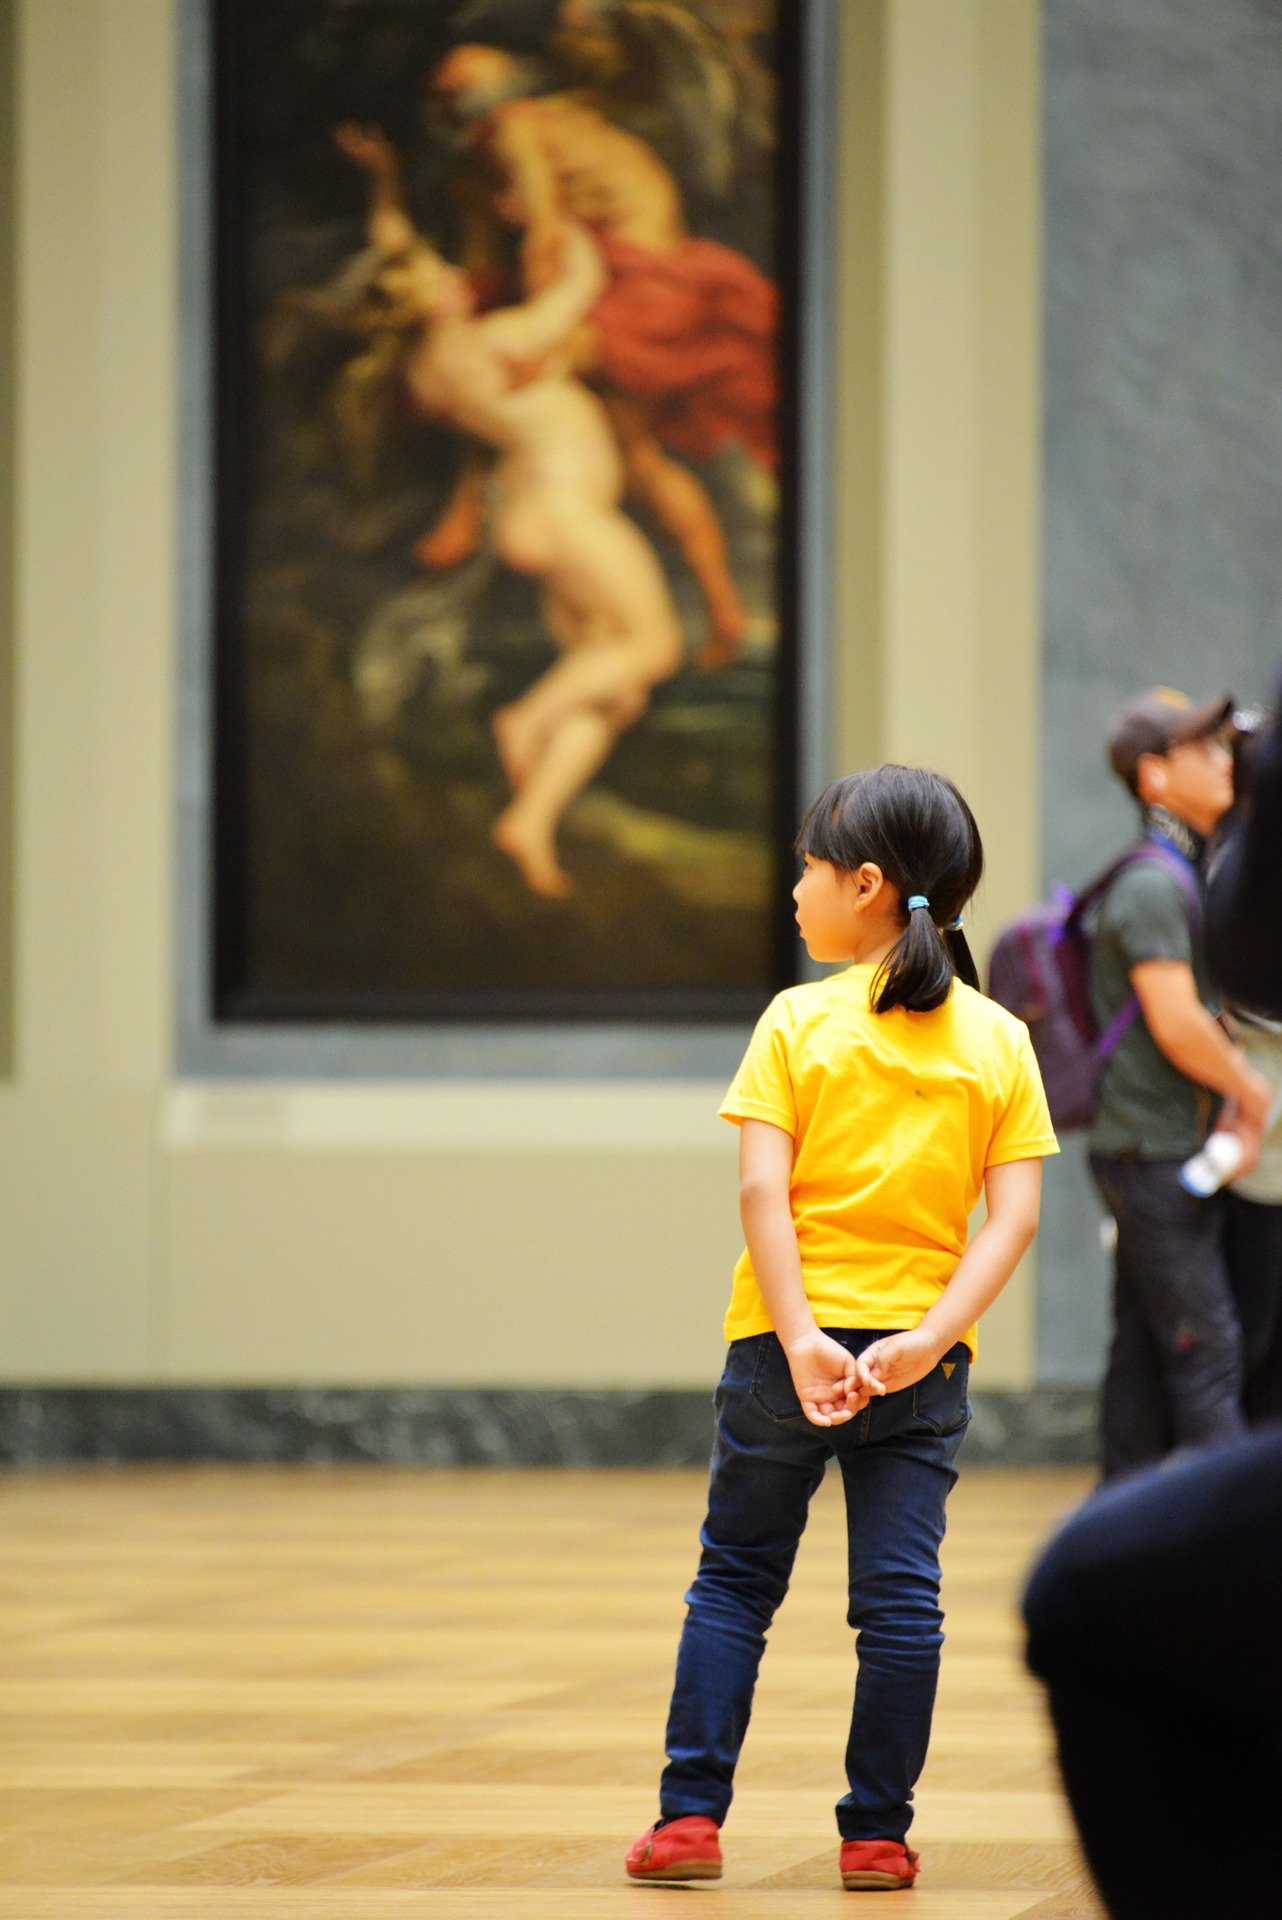 Child standing in front of an art piece in a museum